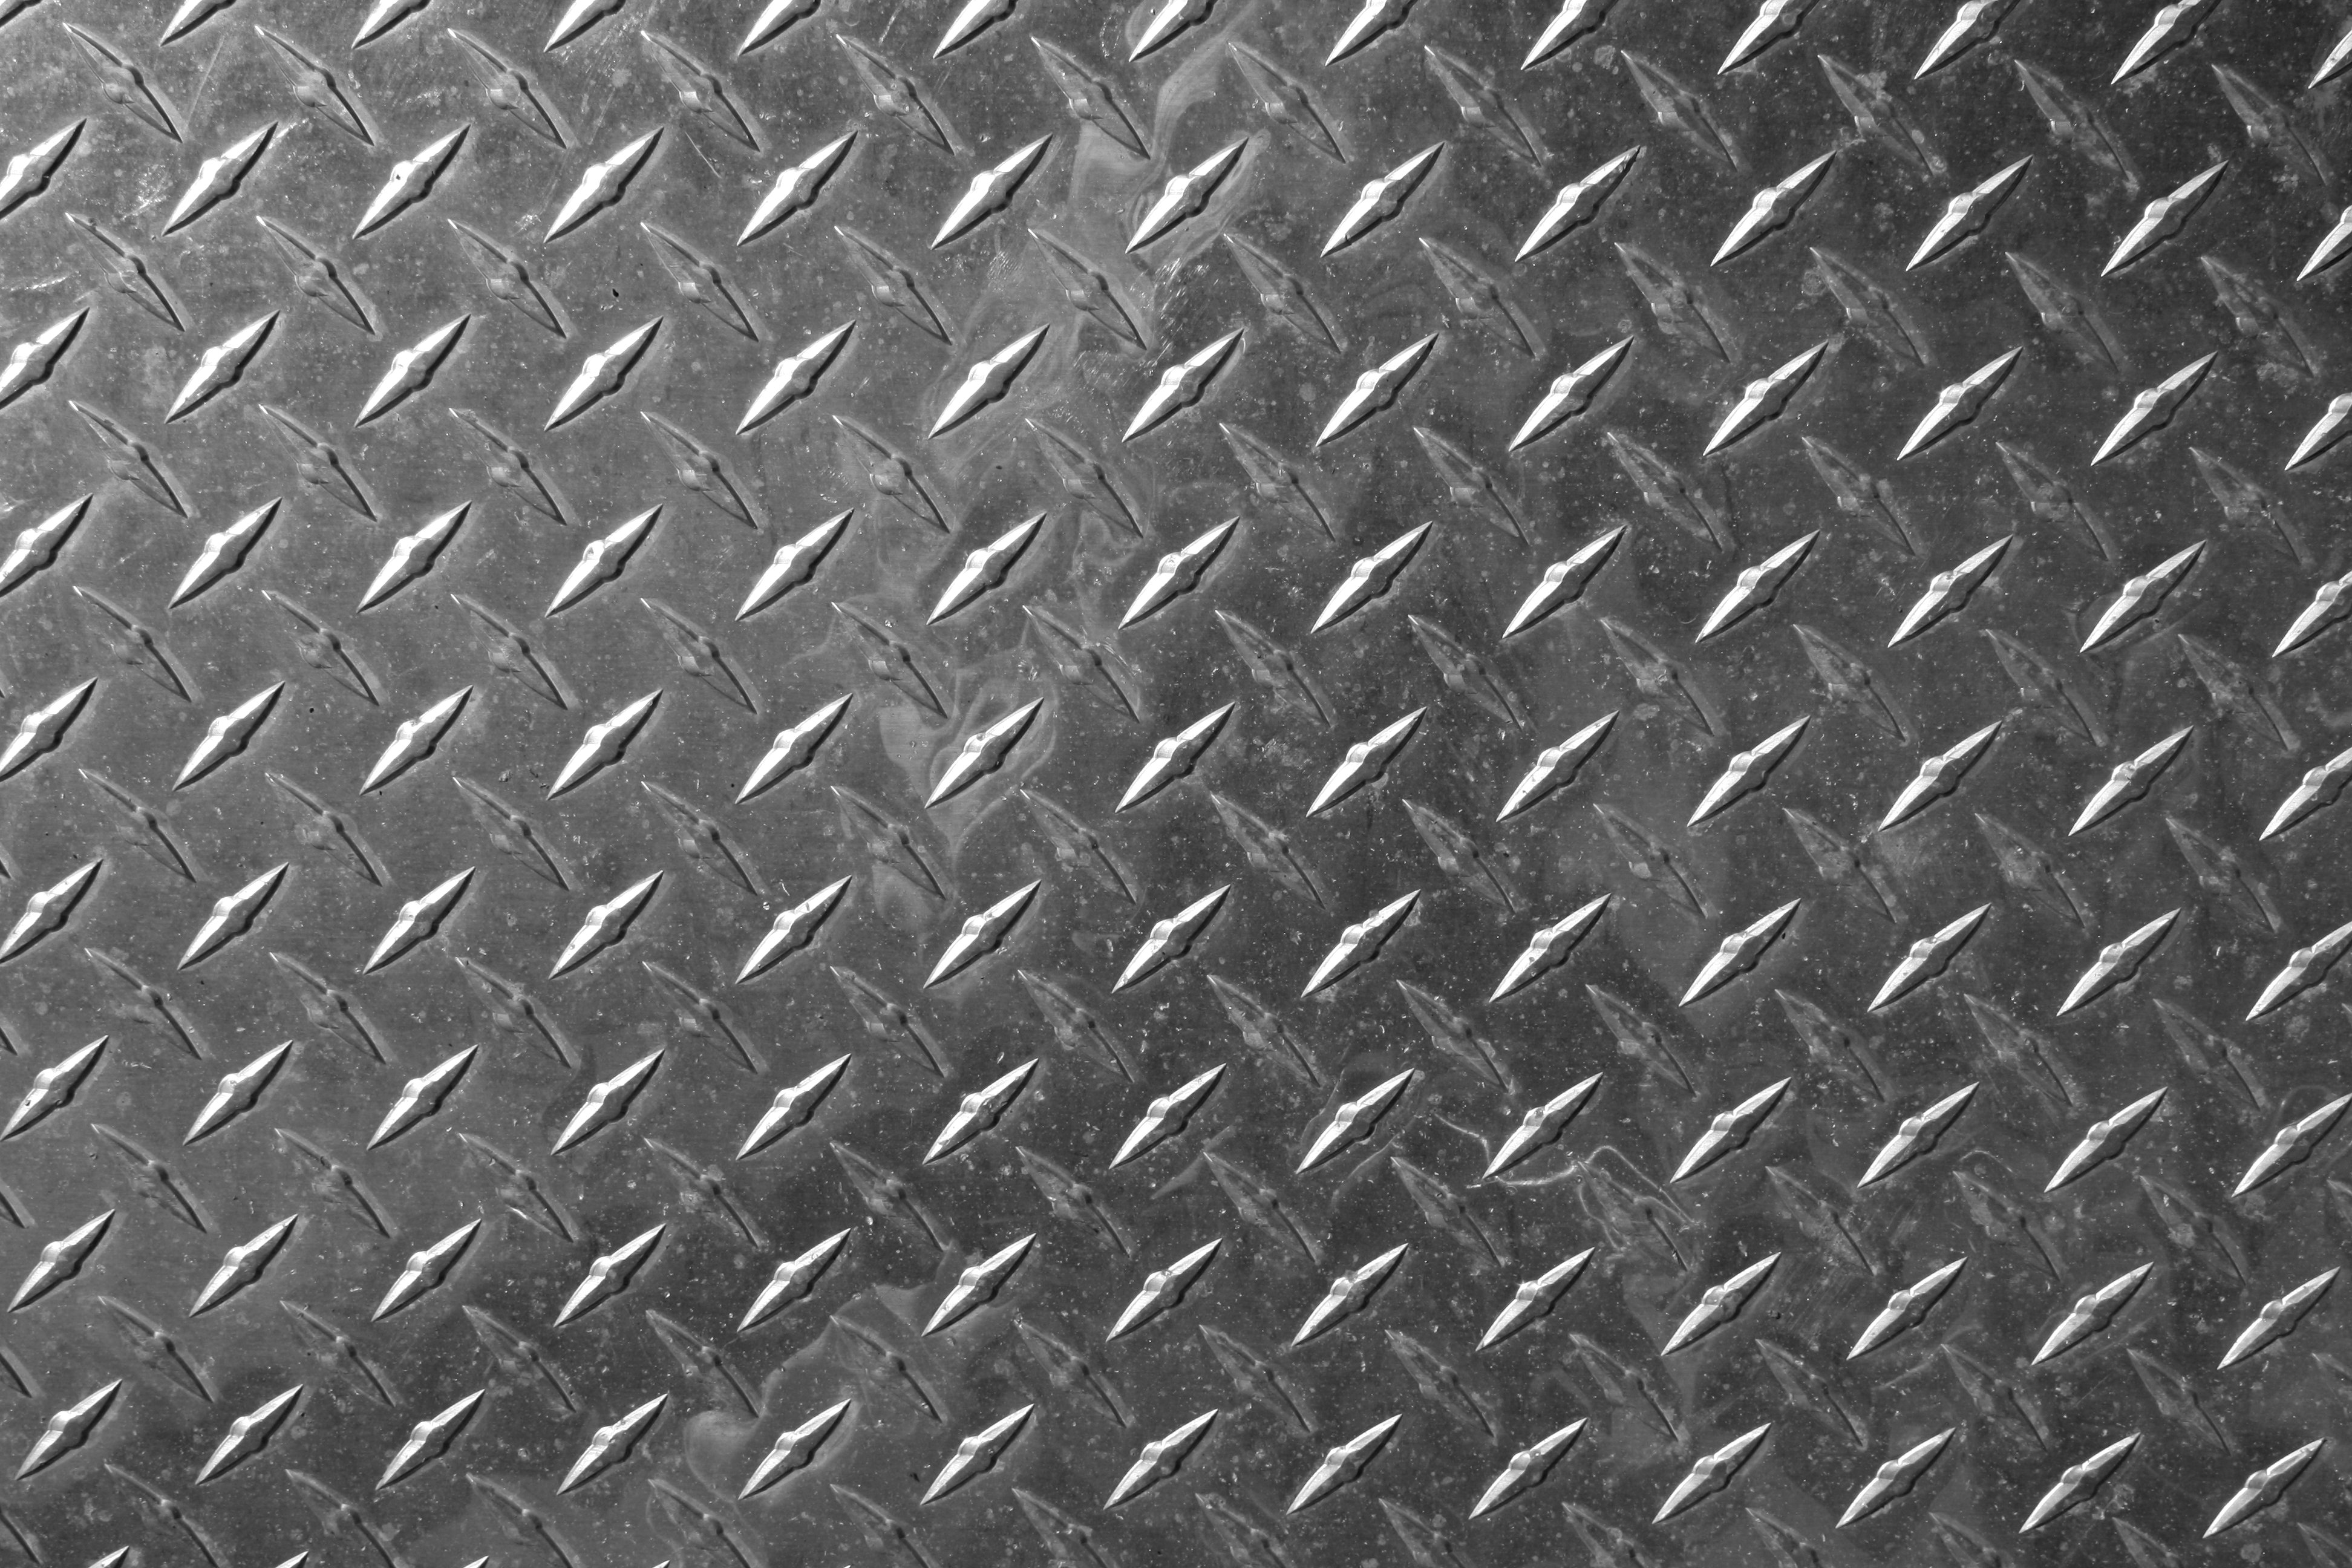 Silver Textured Sheet Metal Texture Picture, Free Photograph